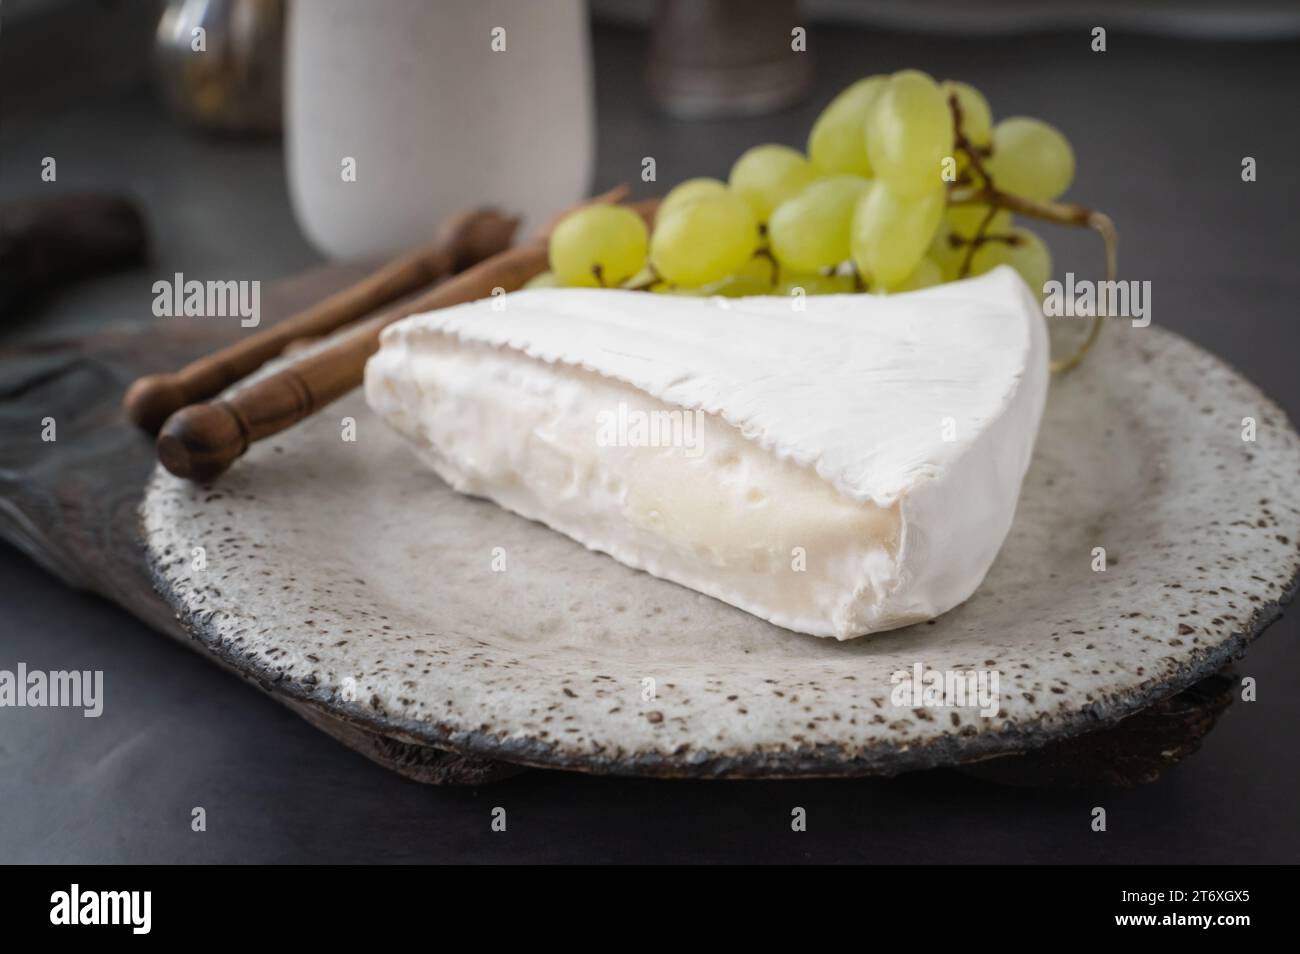 Soft brie camembert cheese with sweet grapes on a handmade clay plate. Side view of a piece of soft cheese with mold. Stock Photo